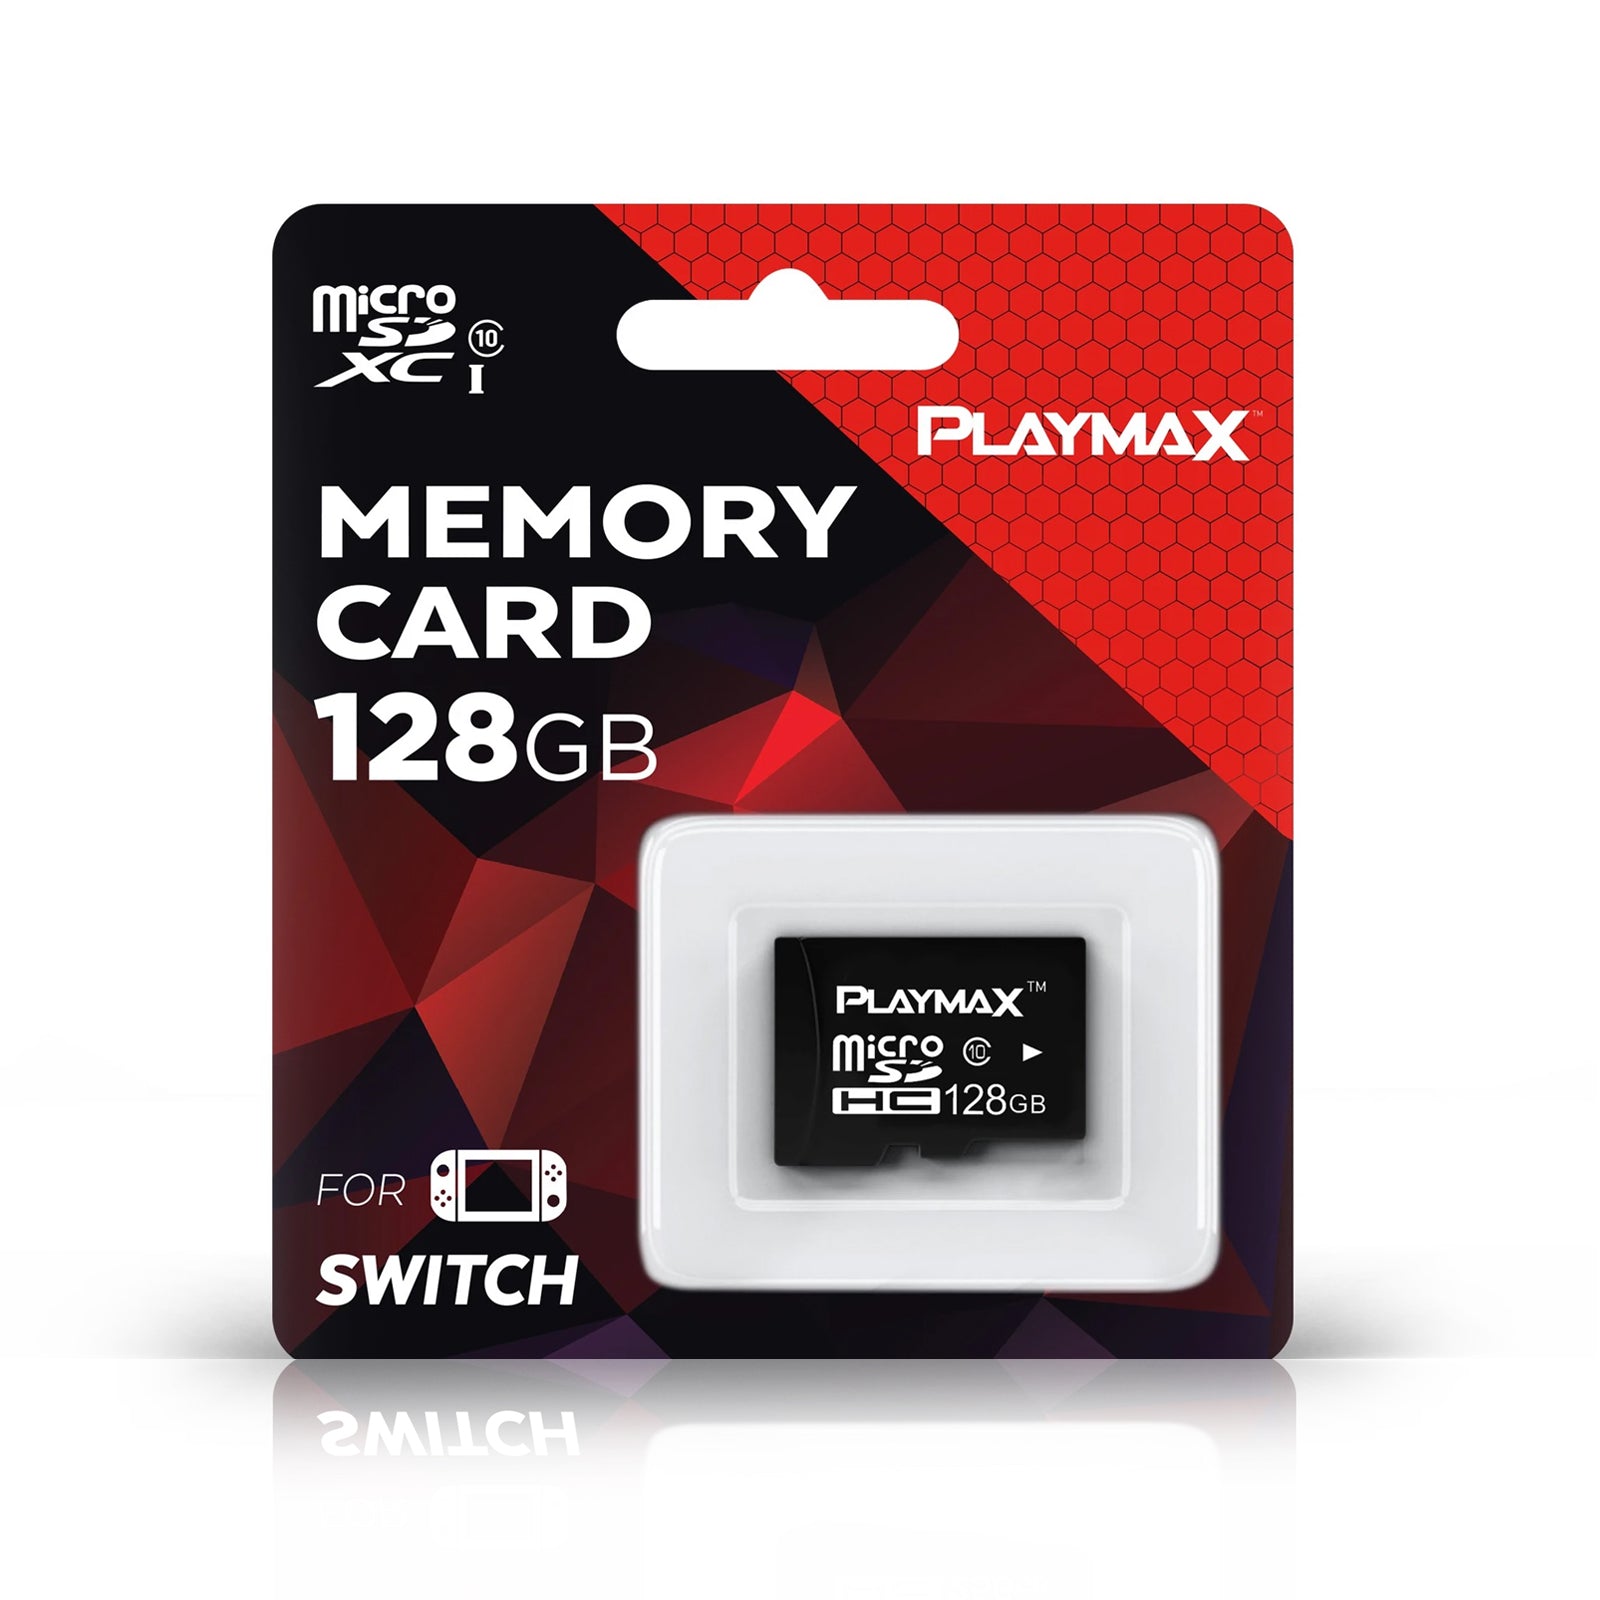 PLAYMAX MEMORY CARD 128GB FOR SWITCH